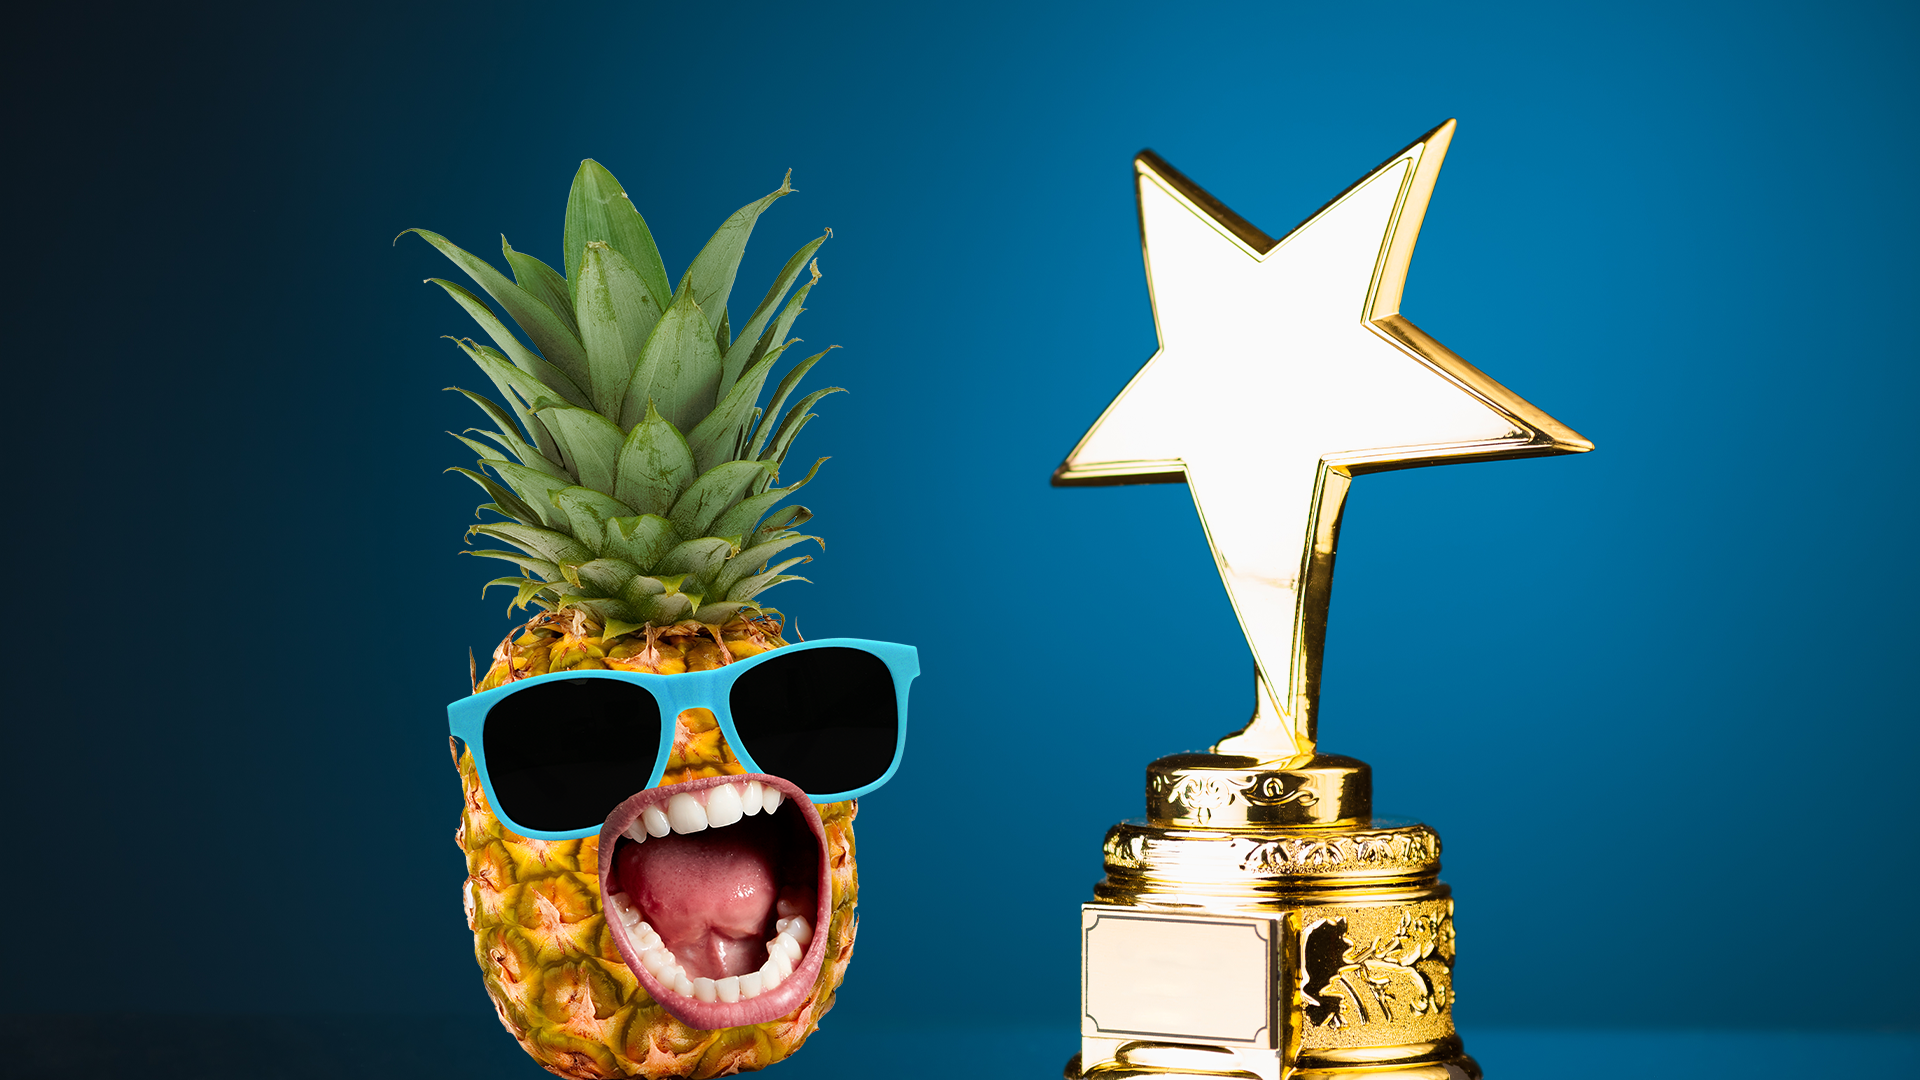 Pineapple with sunglasses and award